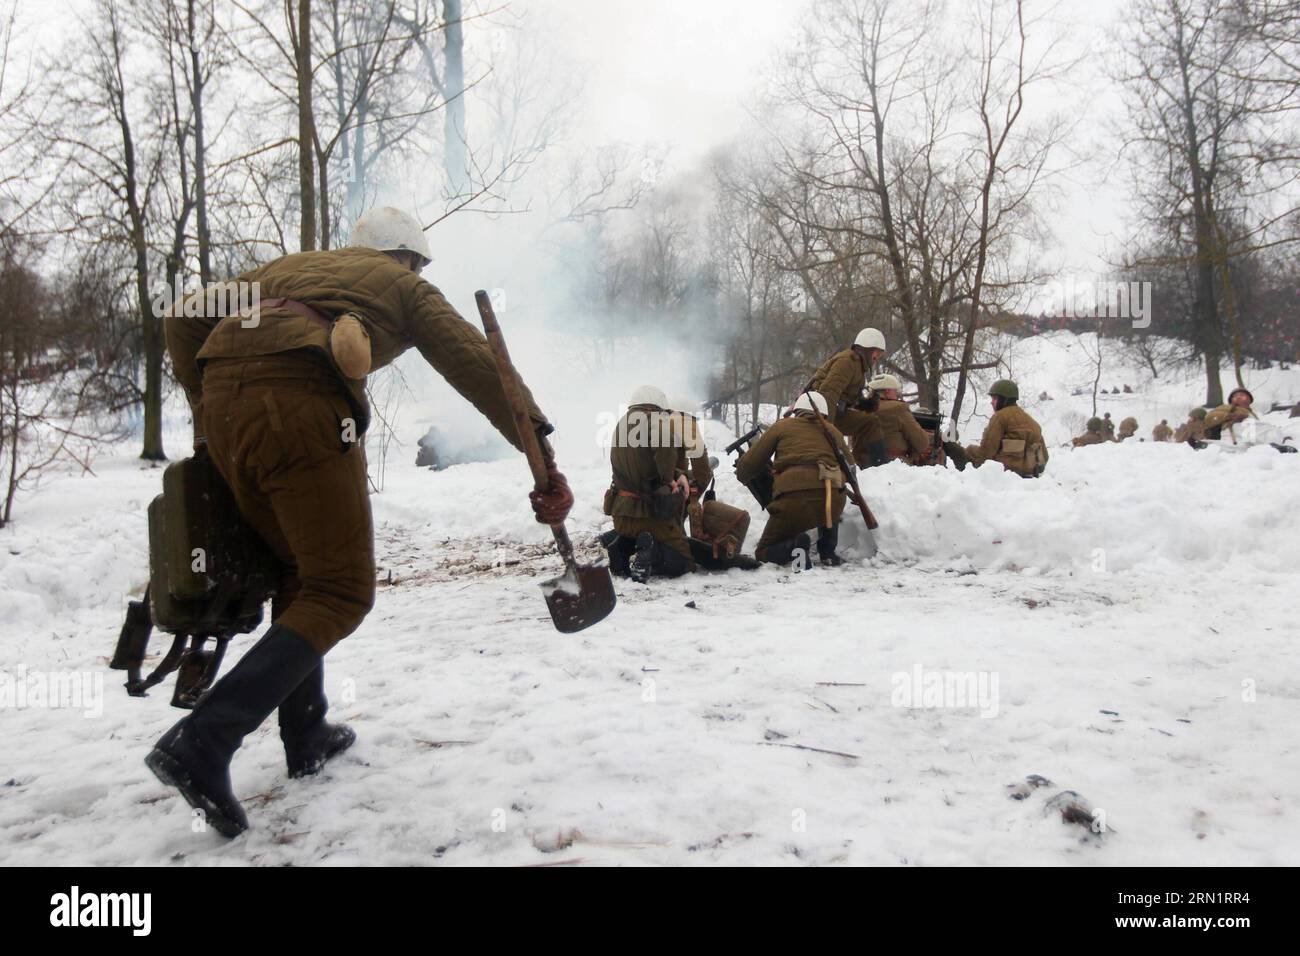 Reenactors dressed as World War II (WWII) Soviet Red Army troops take part in a battle reconstruction marking the 72nd anniversary of the breakthrough of Leningrad (St. Petersburg) from the Nazi blockade in WWII on Jan. 18, 2015, in St. Petersburg, Russia. ) (lmz) RUSSIA-ST. PETERSBURG-WWII-REENACTMENT LuxJinbo PUBLICATIONxNOTxINxCHN   Reenactors Dressed As World was II WWII Soviet Red Army Troops Take Part in a Battle Reconstruction marking The 72nd Anniversary of The BREAKTHROUGH of Leningrad St Petersburg from The Nazi Blockade in WWII ON Jan 18 2015 in St Petersburg Russia  Russia St Peter Stock Photo